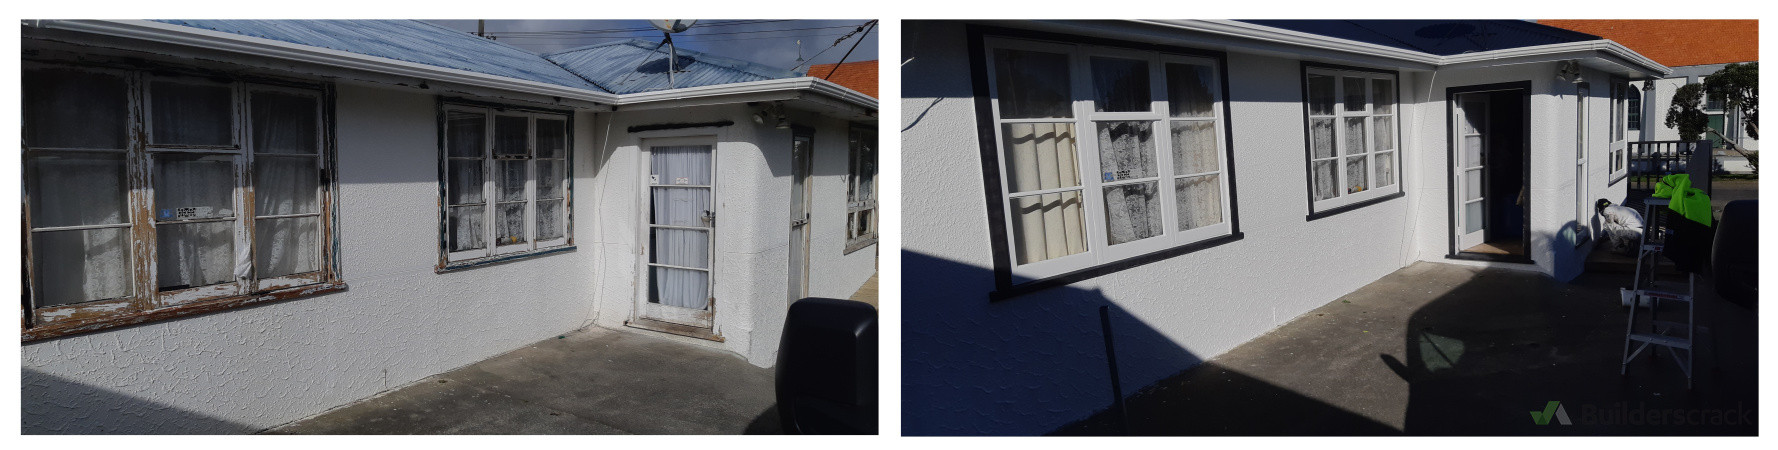 Exterior Repaint - before and after